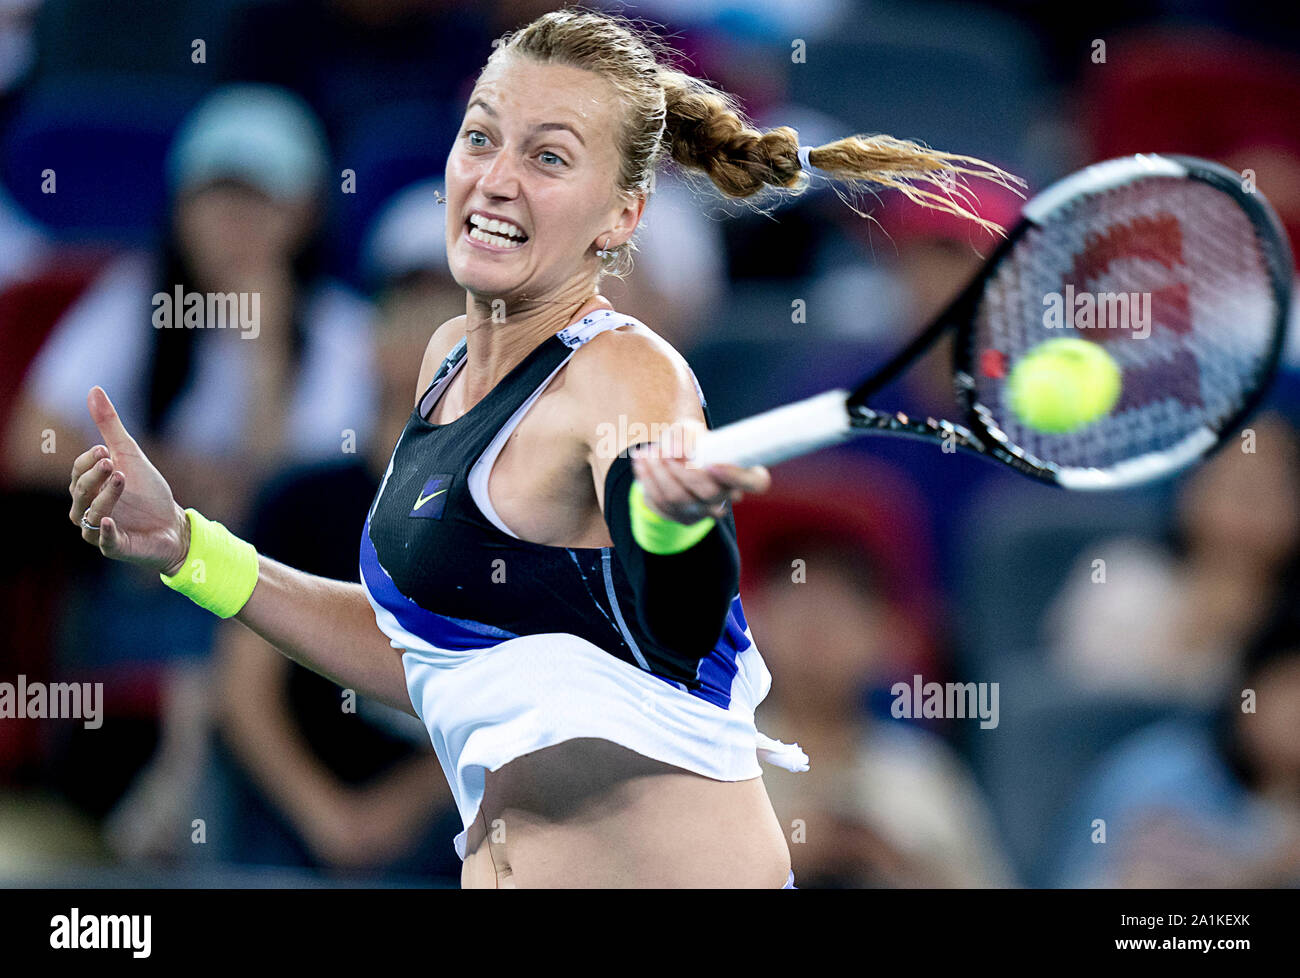 Wuhan. 27th Sep, 2019. Petra Kvitova of the Czech Republic competes during  the women's singles semifinal between Alison Riske of the United States and  Petra Kvitova of the Czech Republic at the